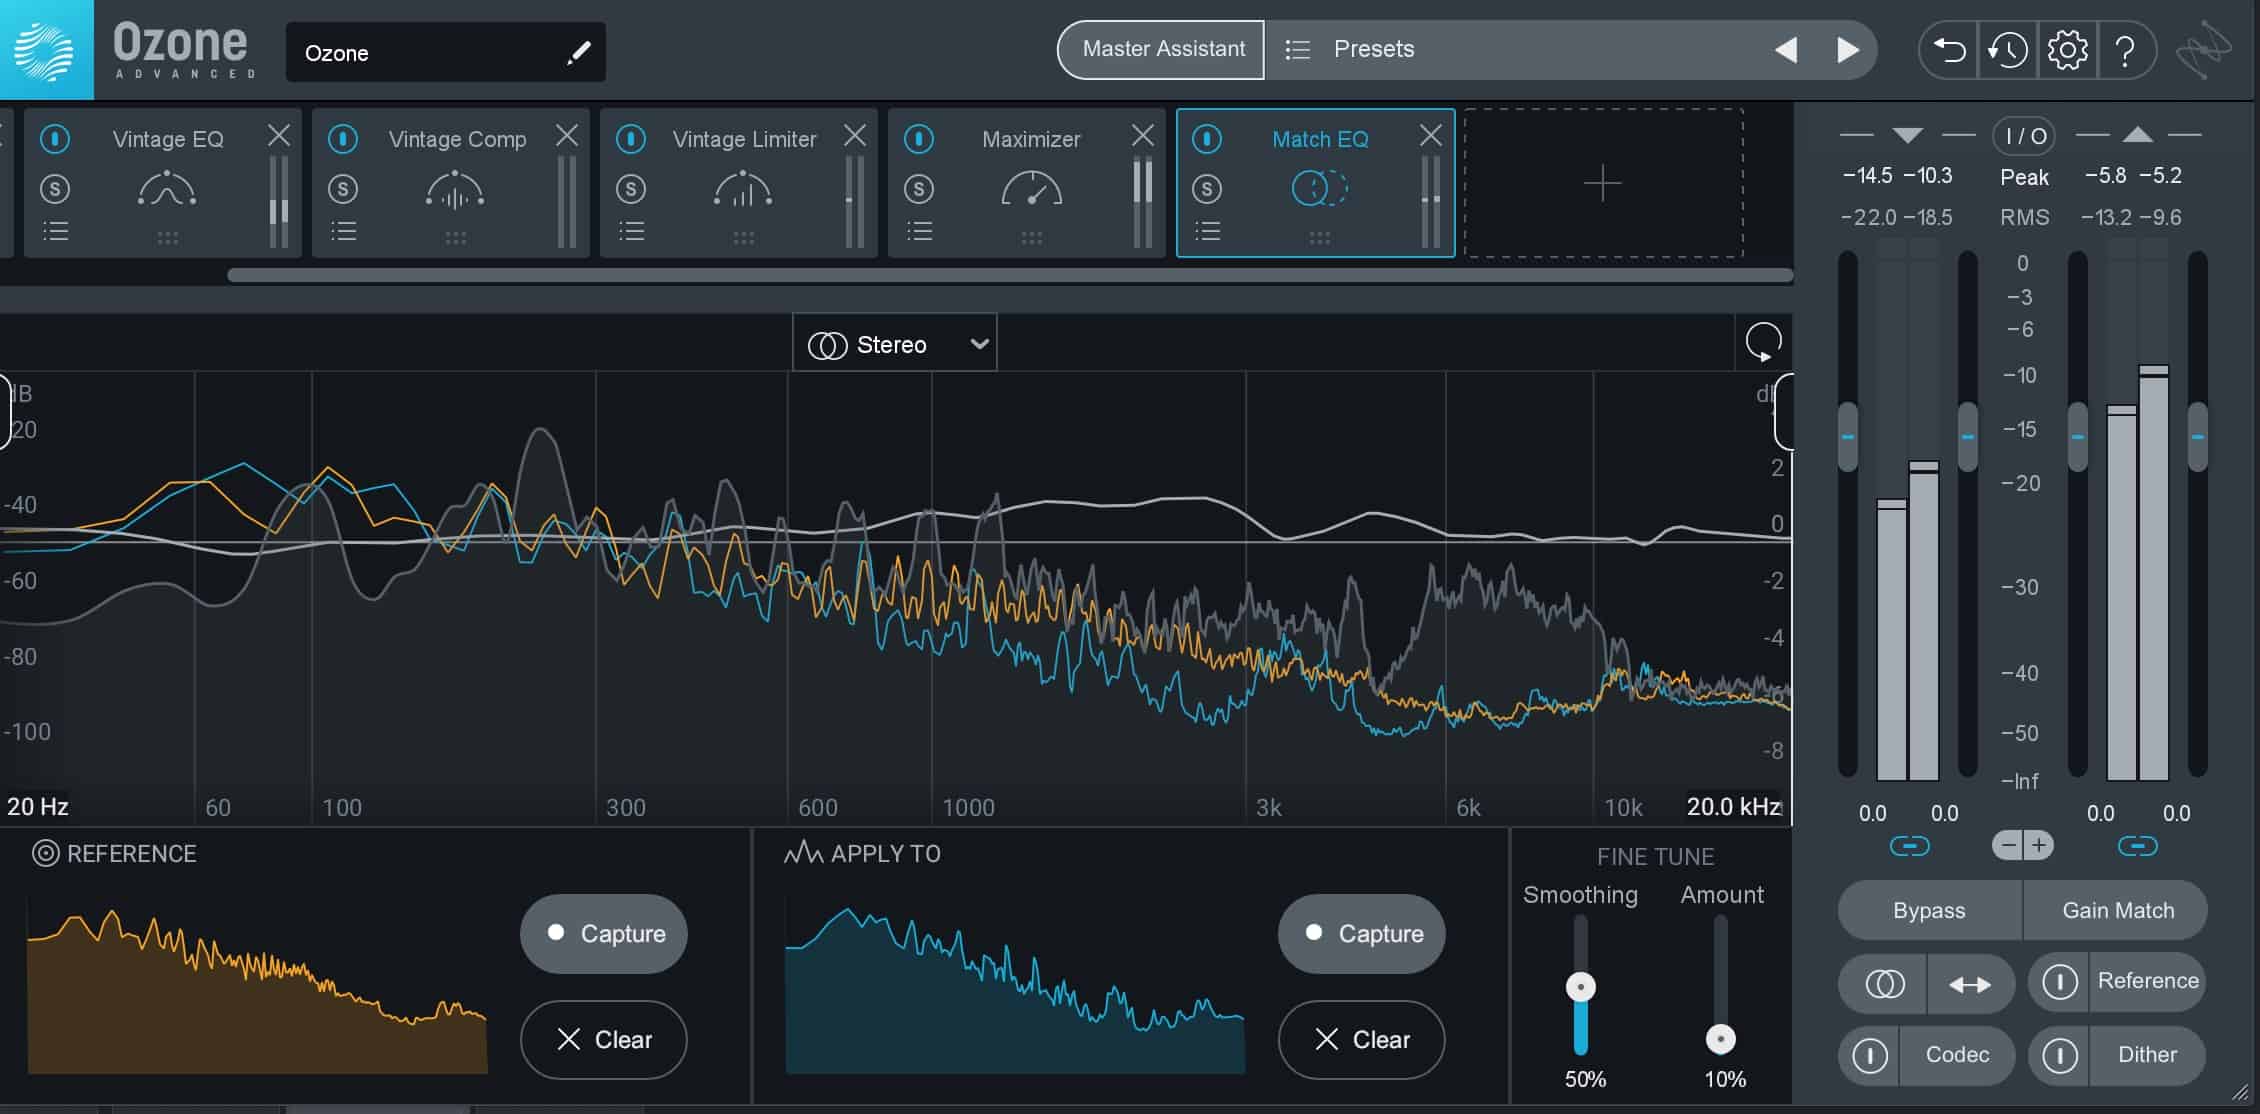 Review of iZotope’s Ozone 9 Advanced